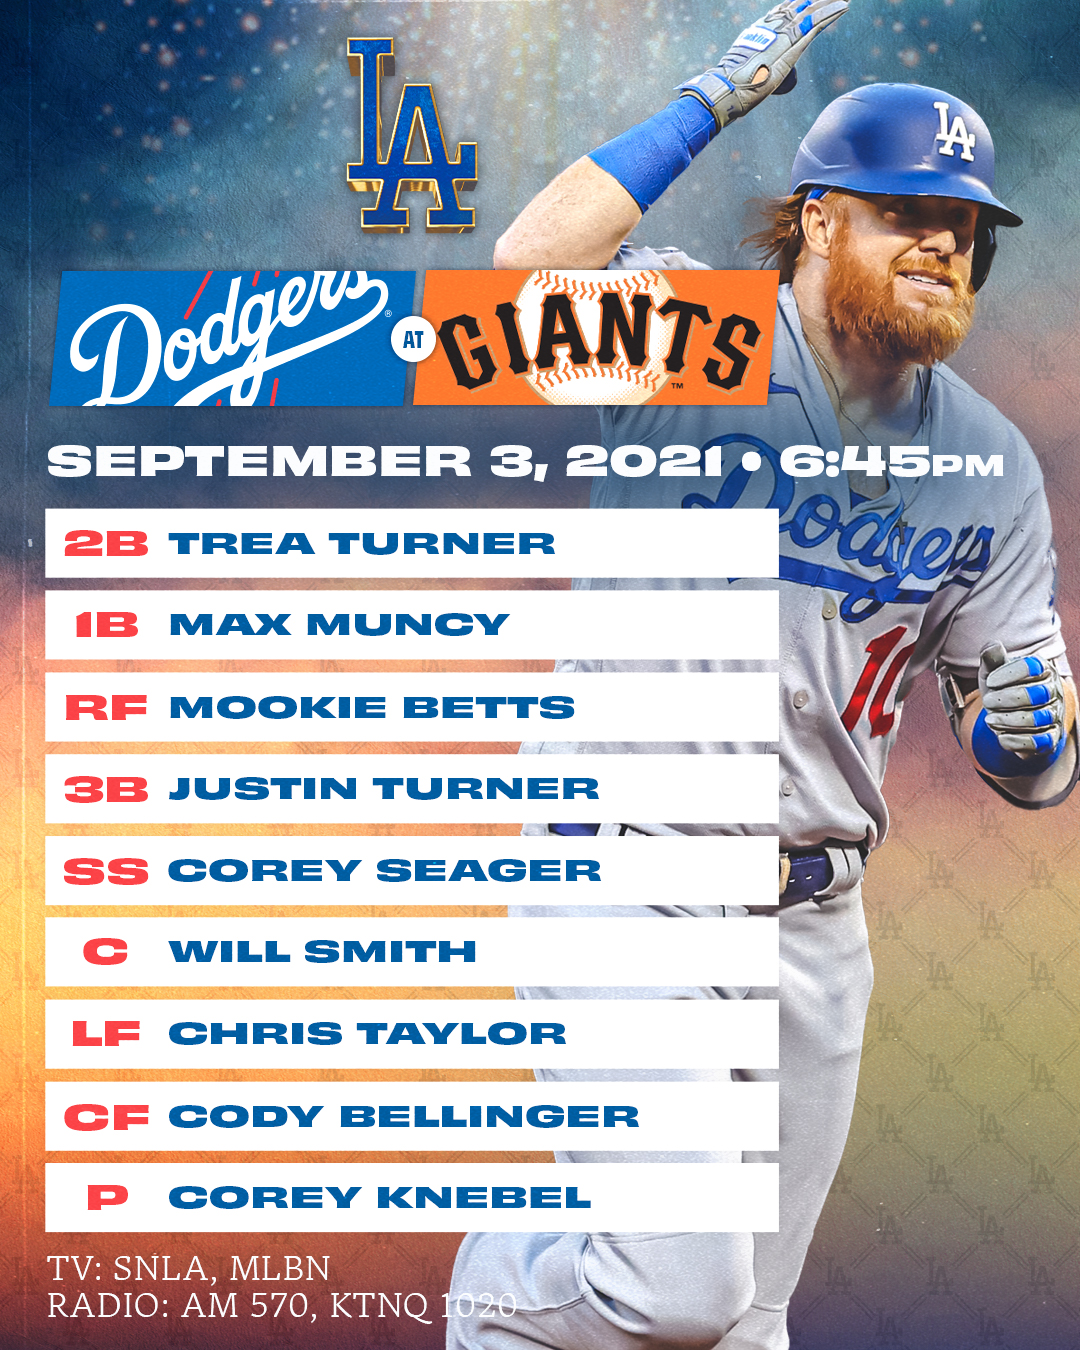 Los Angeles Dodgers on Twitter "Tonight's Dodgers lineup at Giants